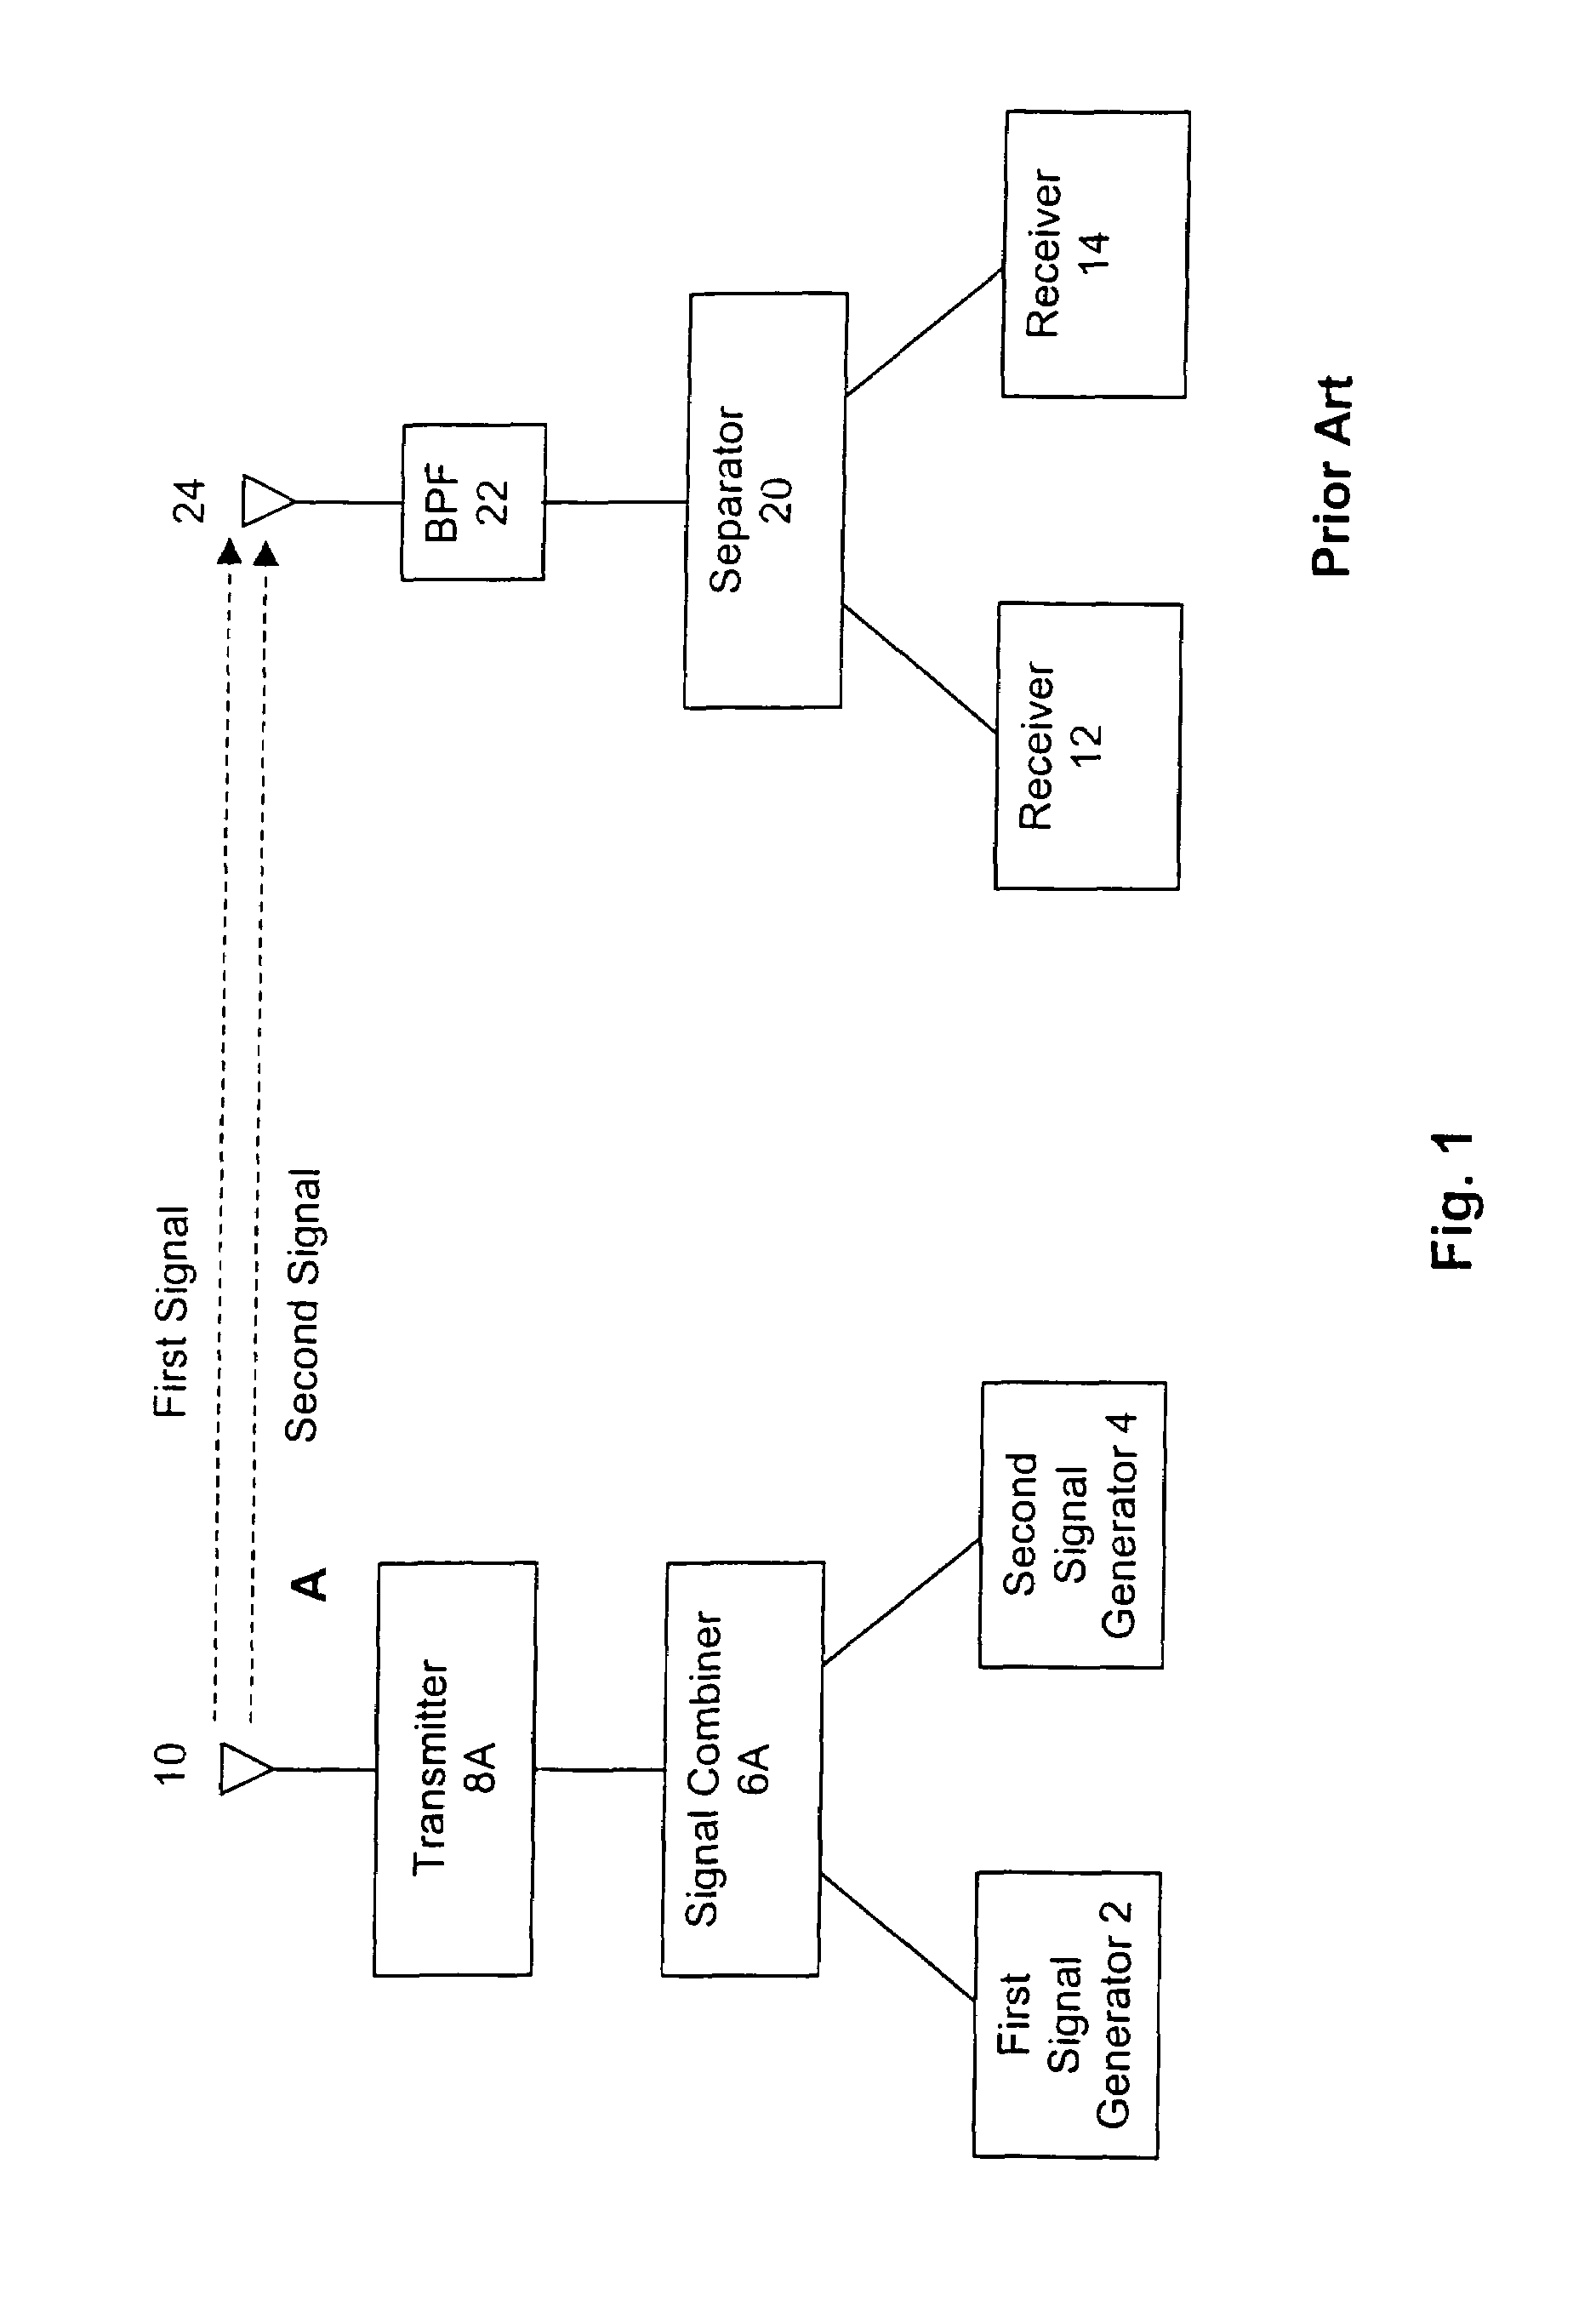 Interference reduction for multiple signals